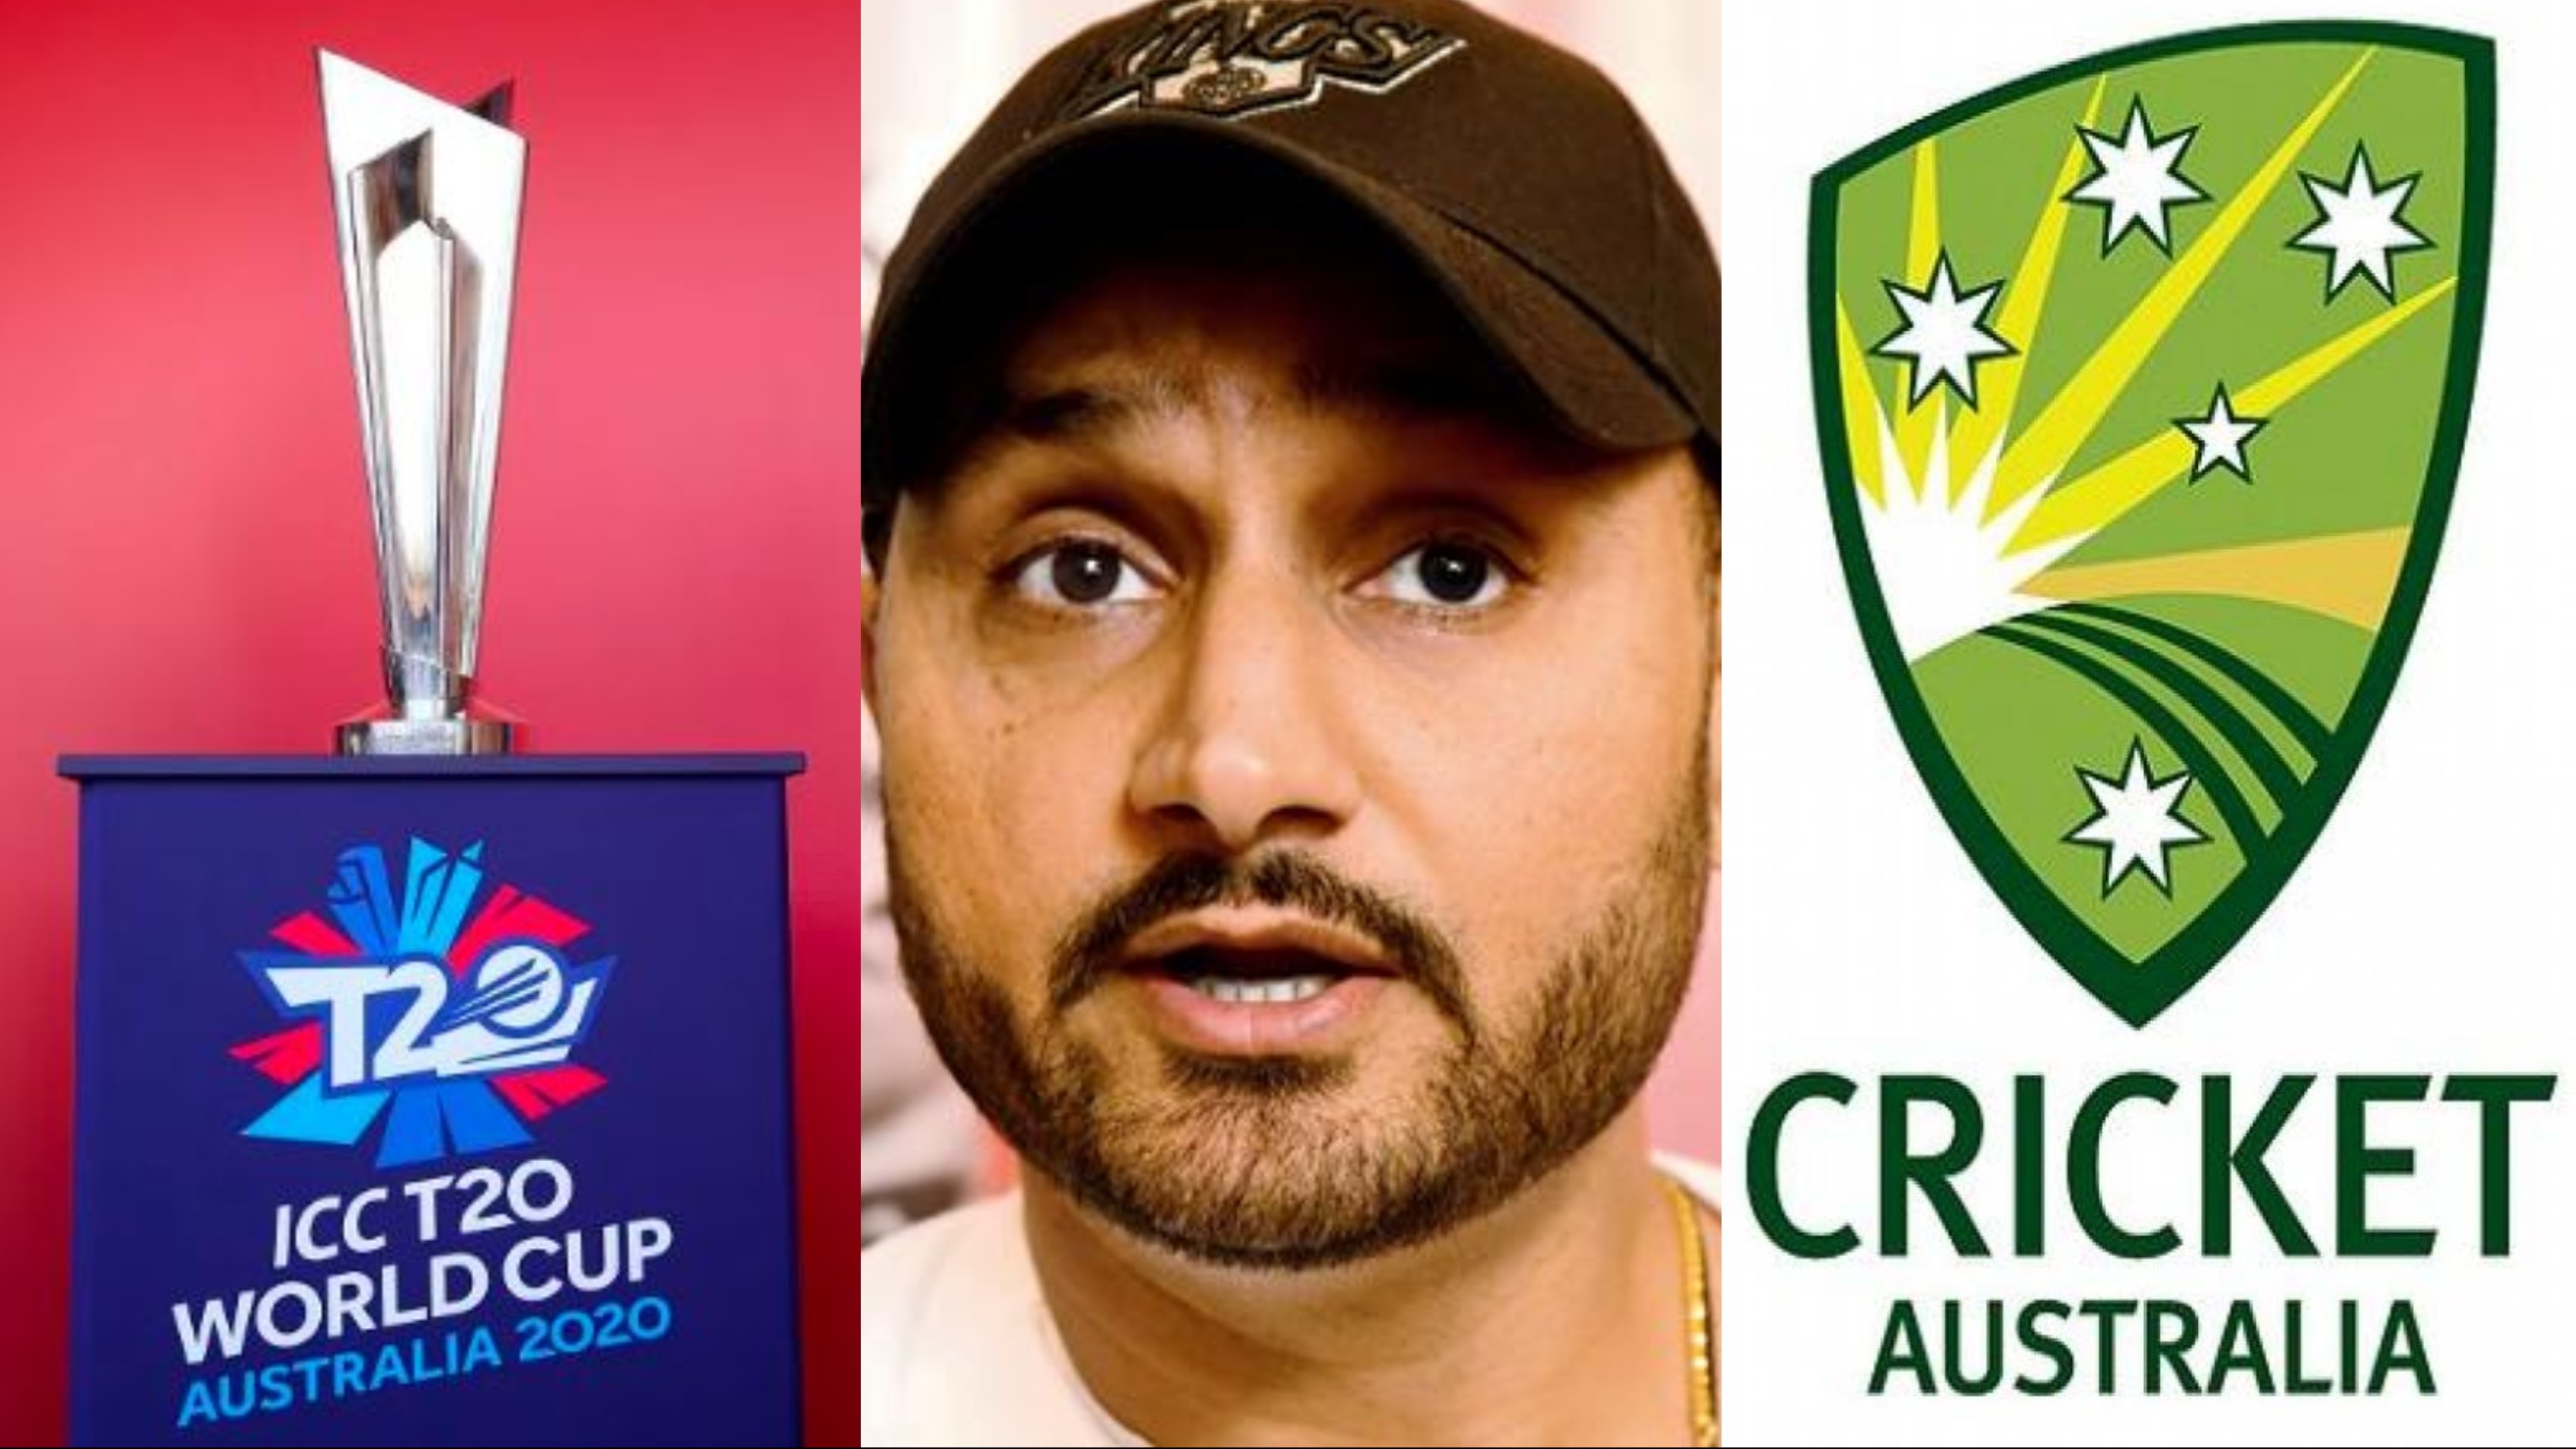 If England can hold matches then Australia can also host T20 World Cup 2020, says Harbhajan Singh